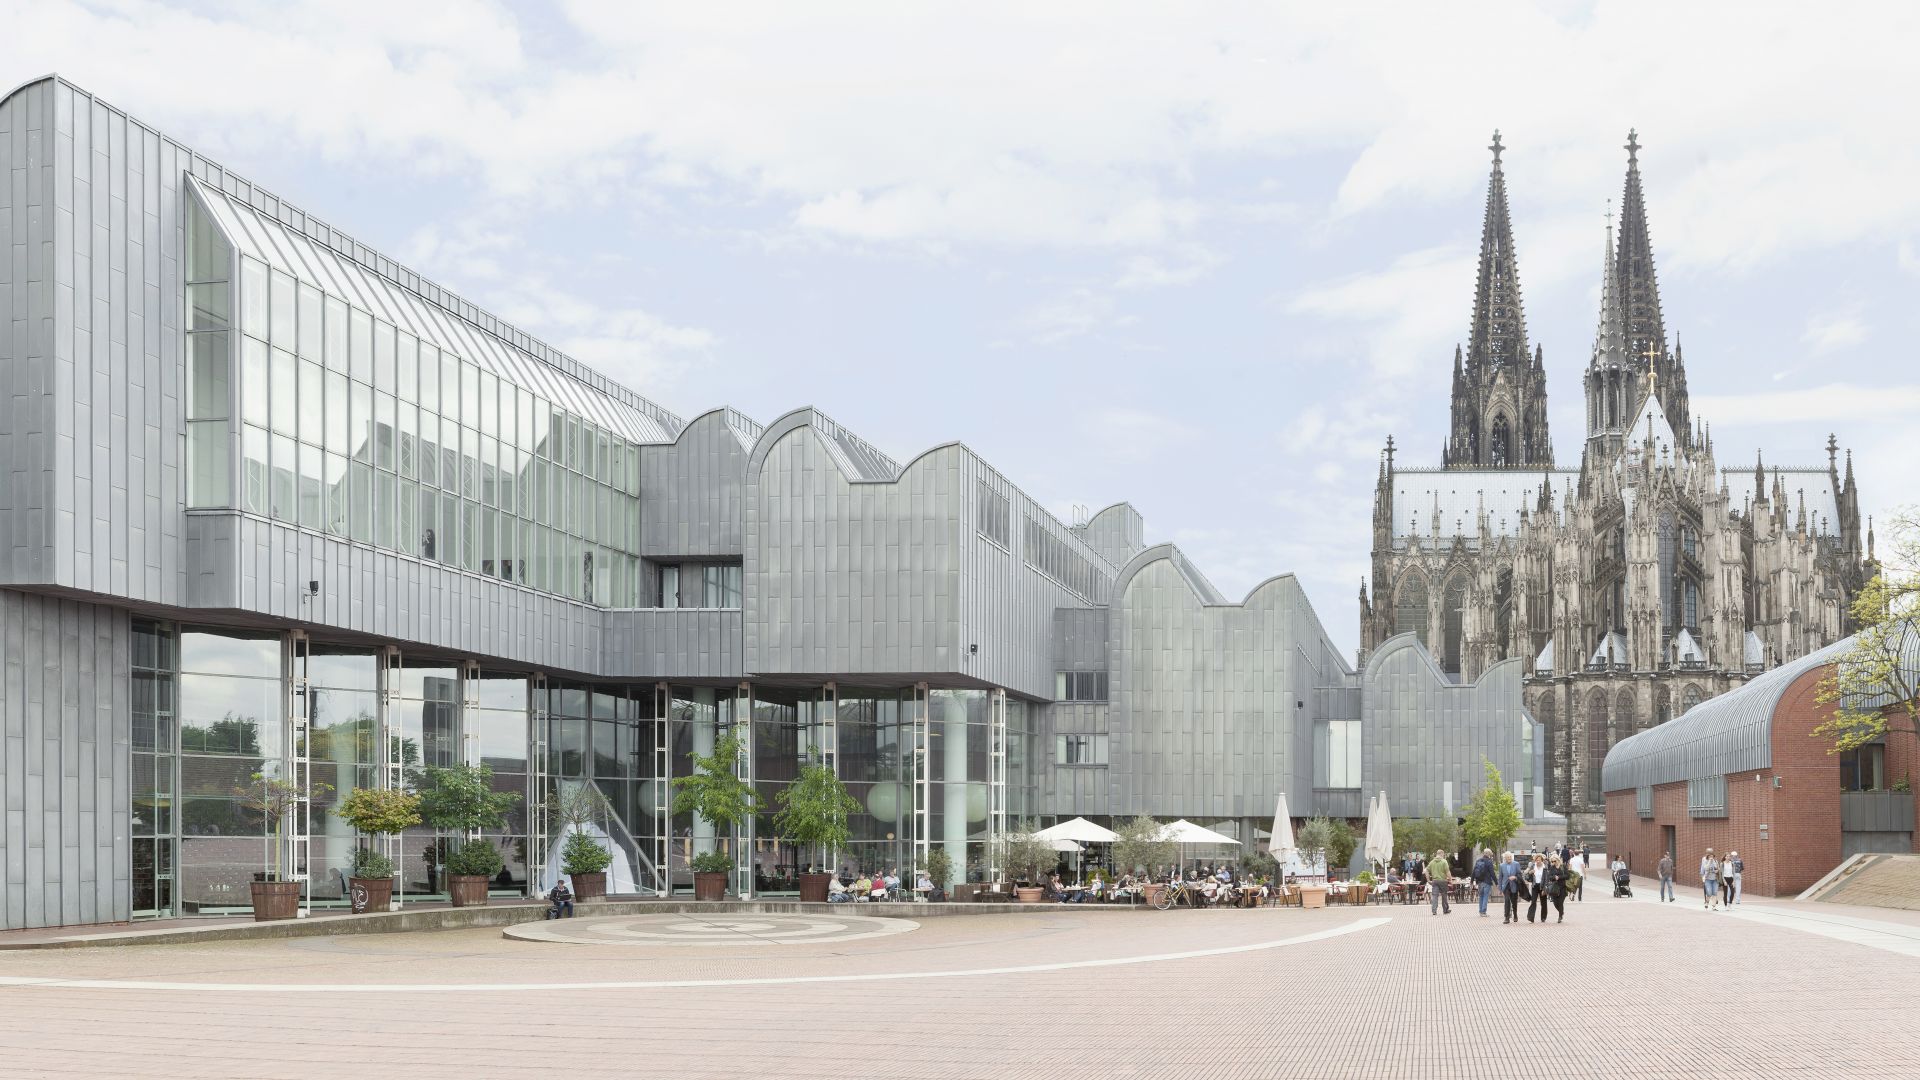 Cologne: Exterior view of the Ludwig Museum and Cologne Cathedral